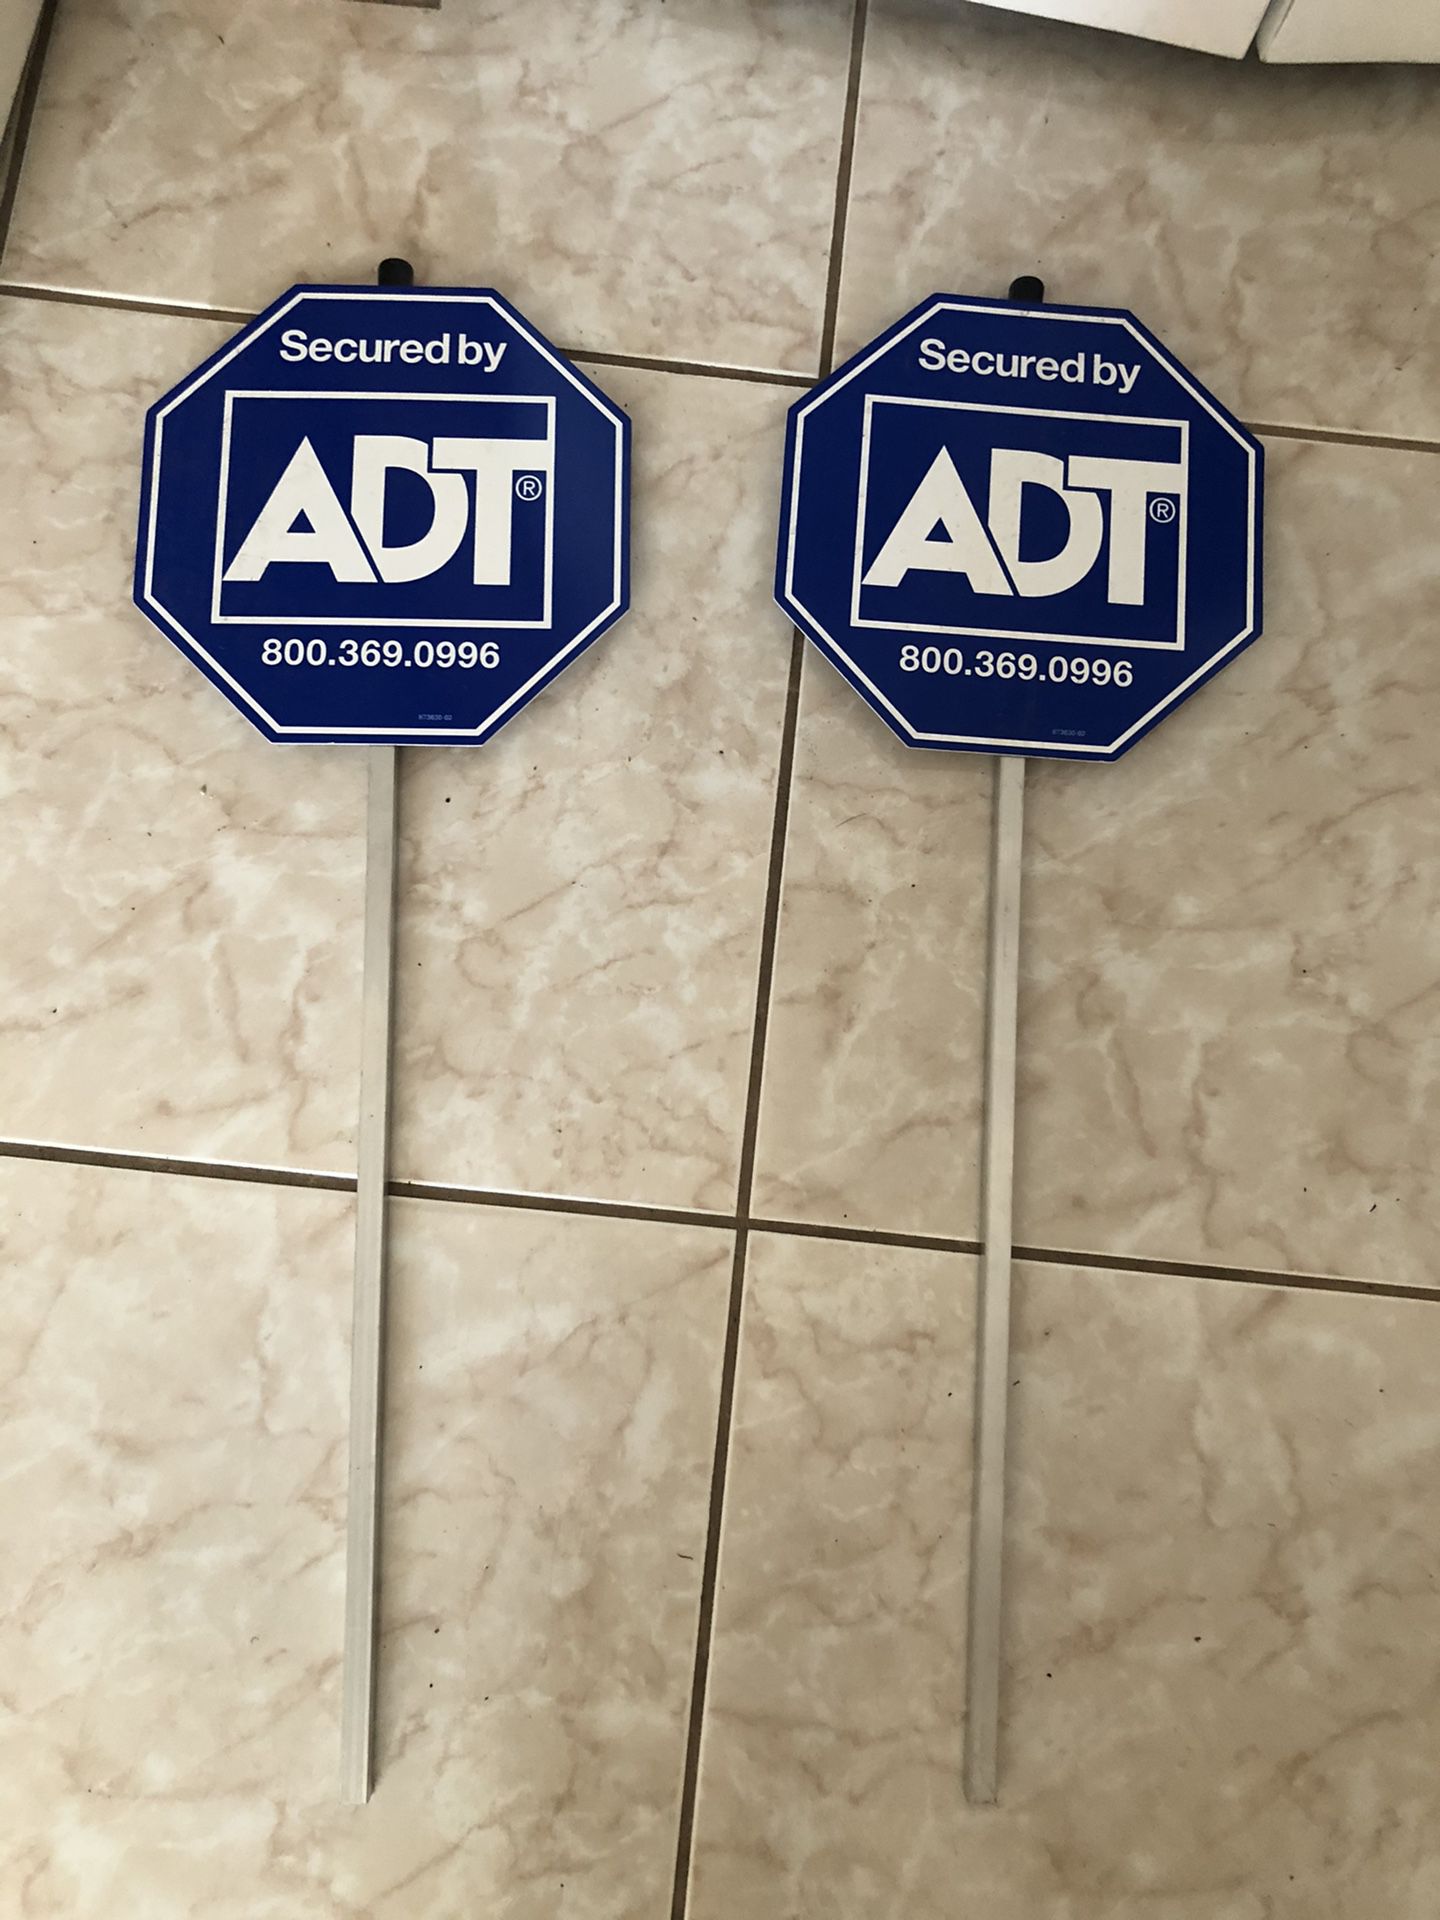 Two ADT signs